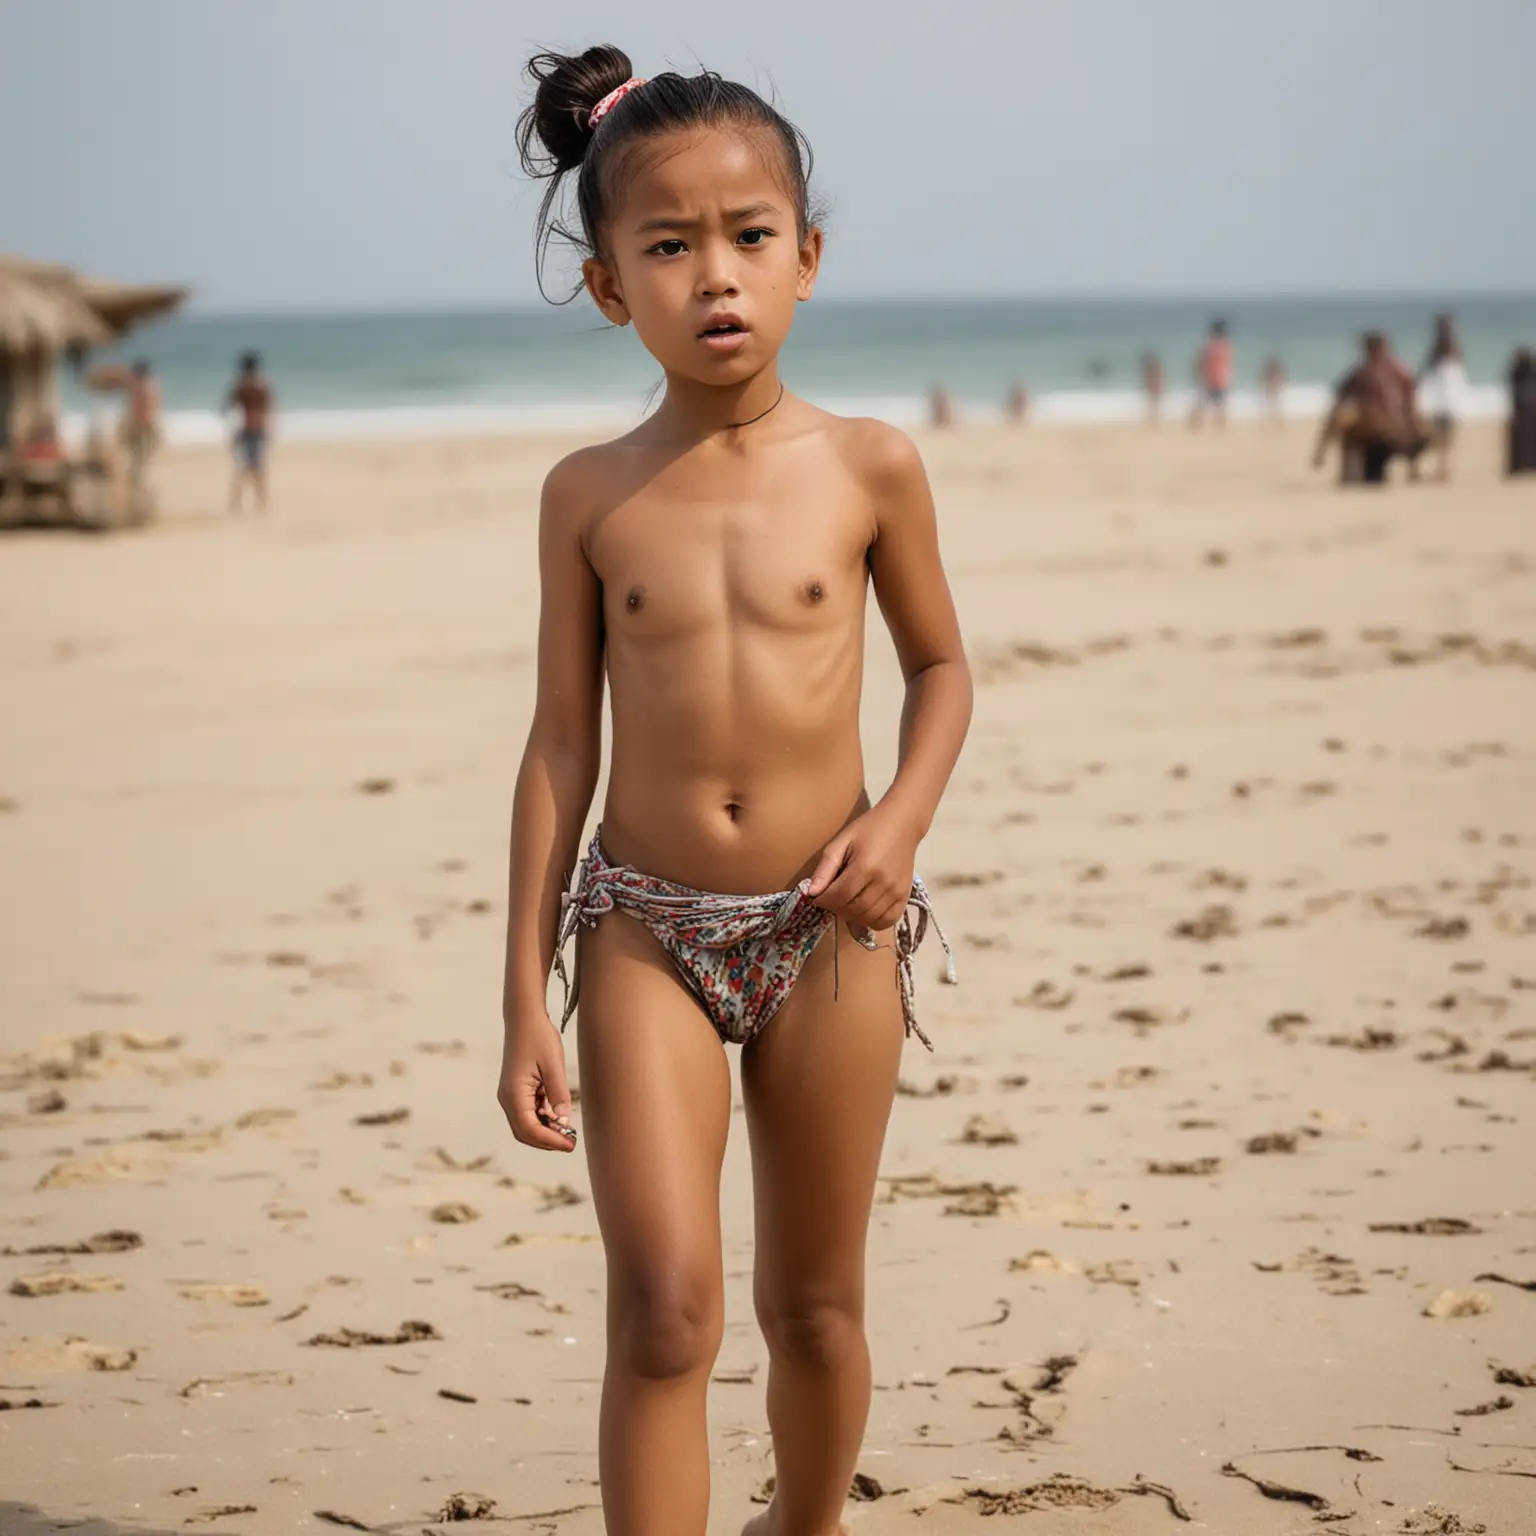 Young-Indonesian-Girl-Walking-on-Sand-in-Bikini-with-Pouting-Expression